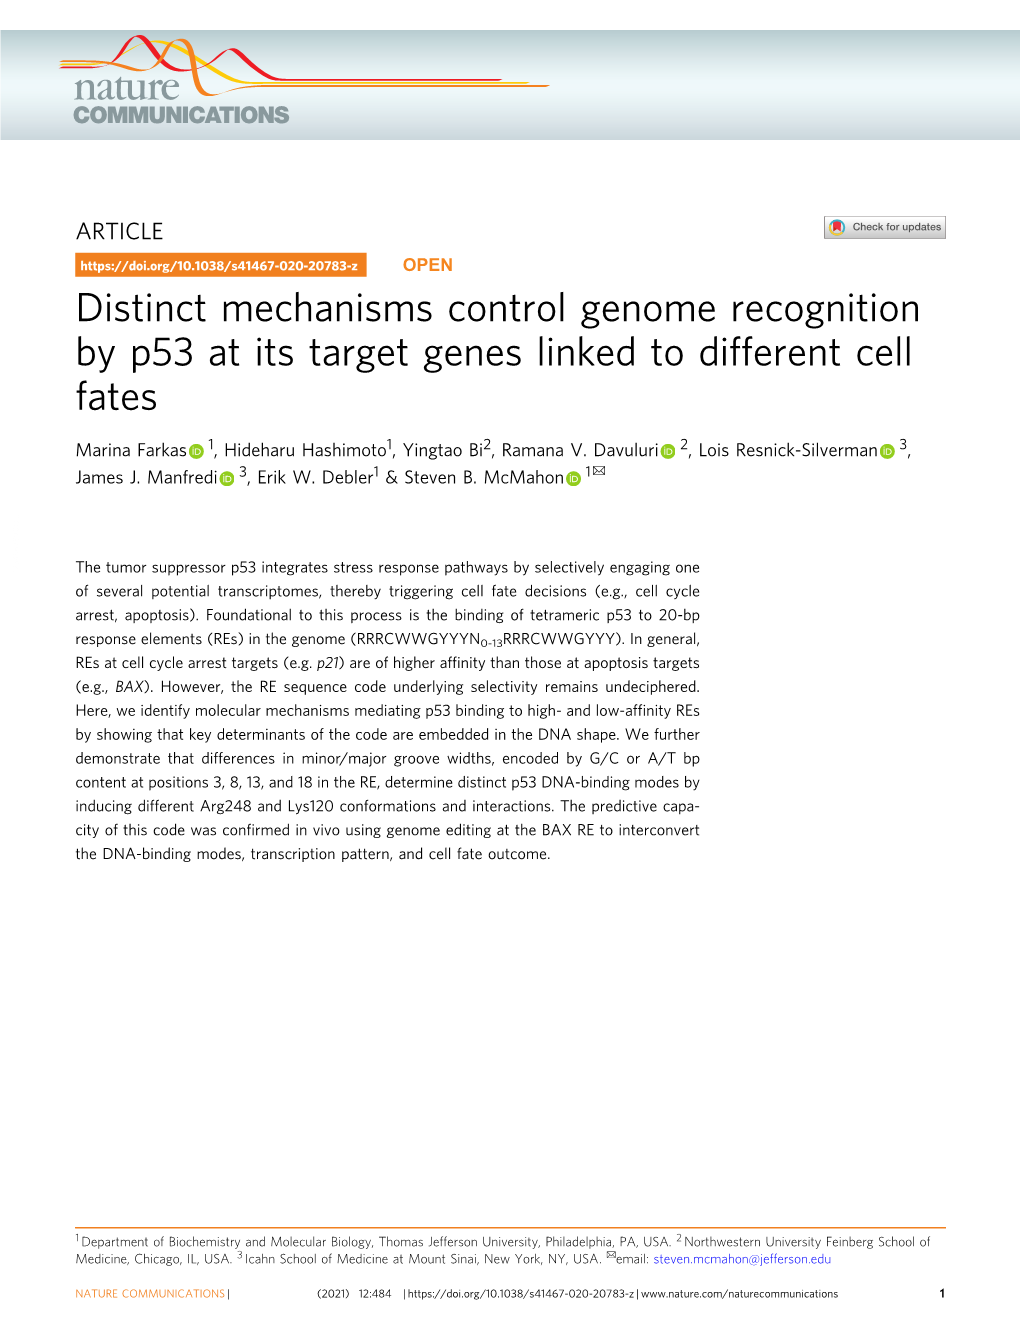 Distinct Mechanisms Control Genome Recognition by P53 at Its Target Genes Linked to Different Cell Fates